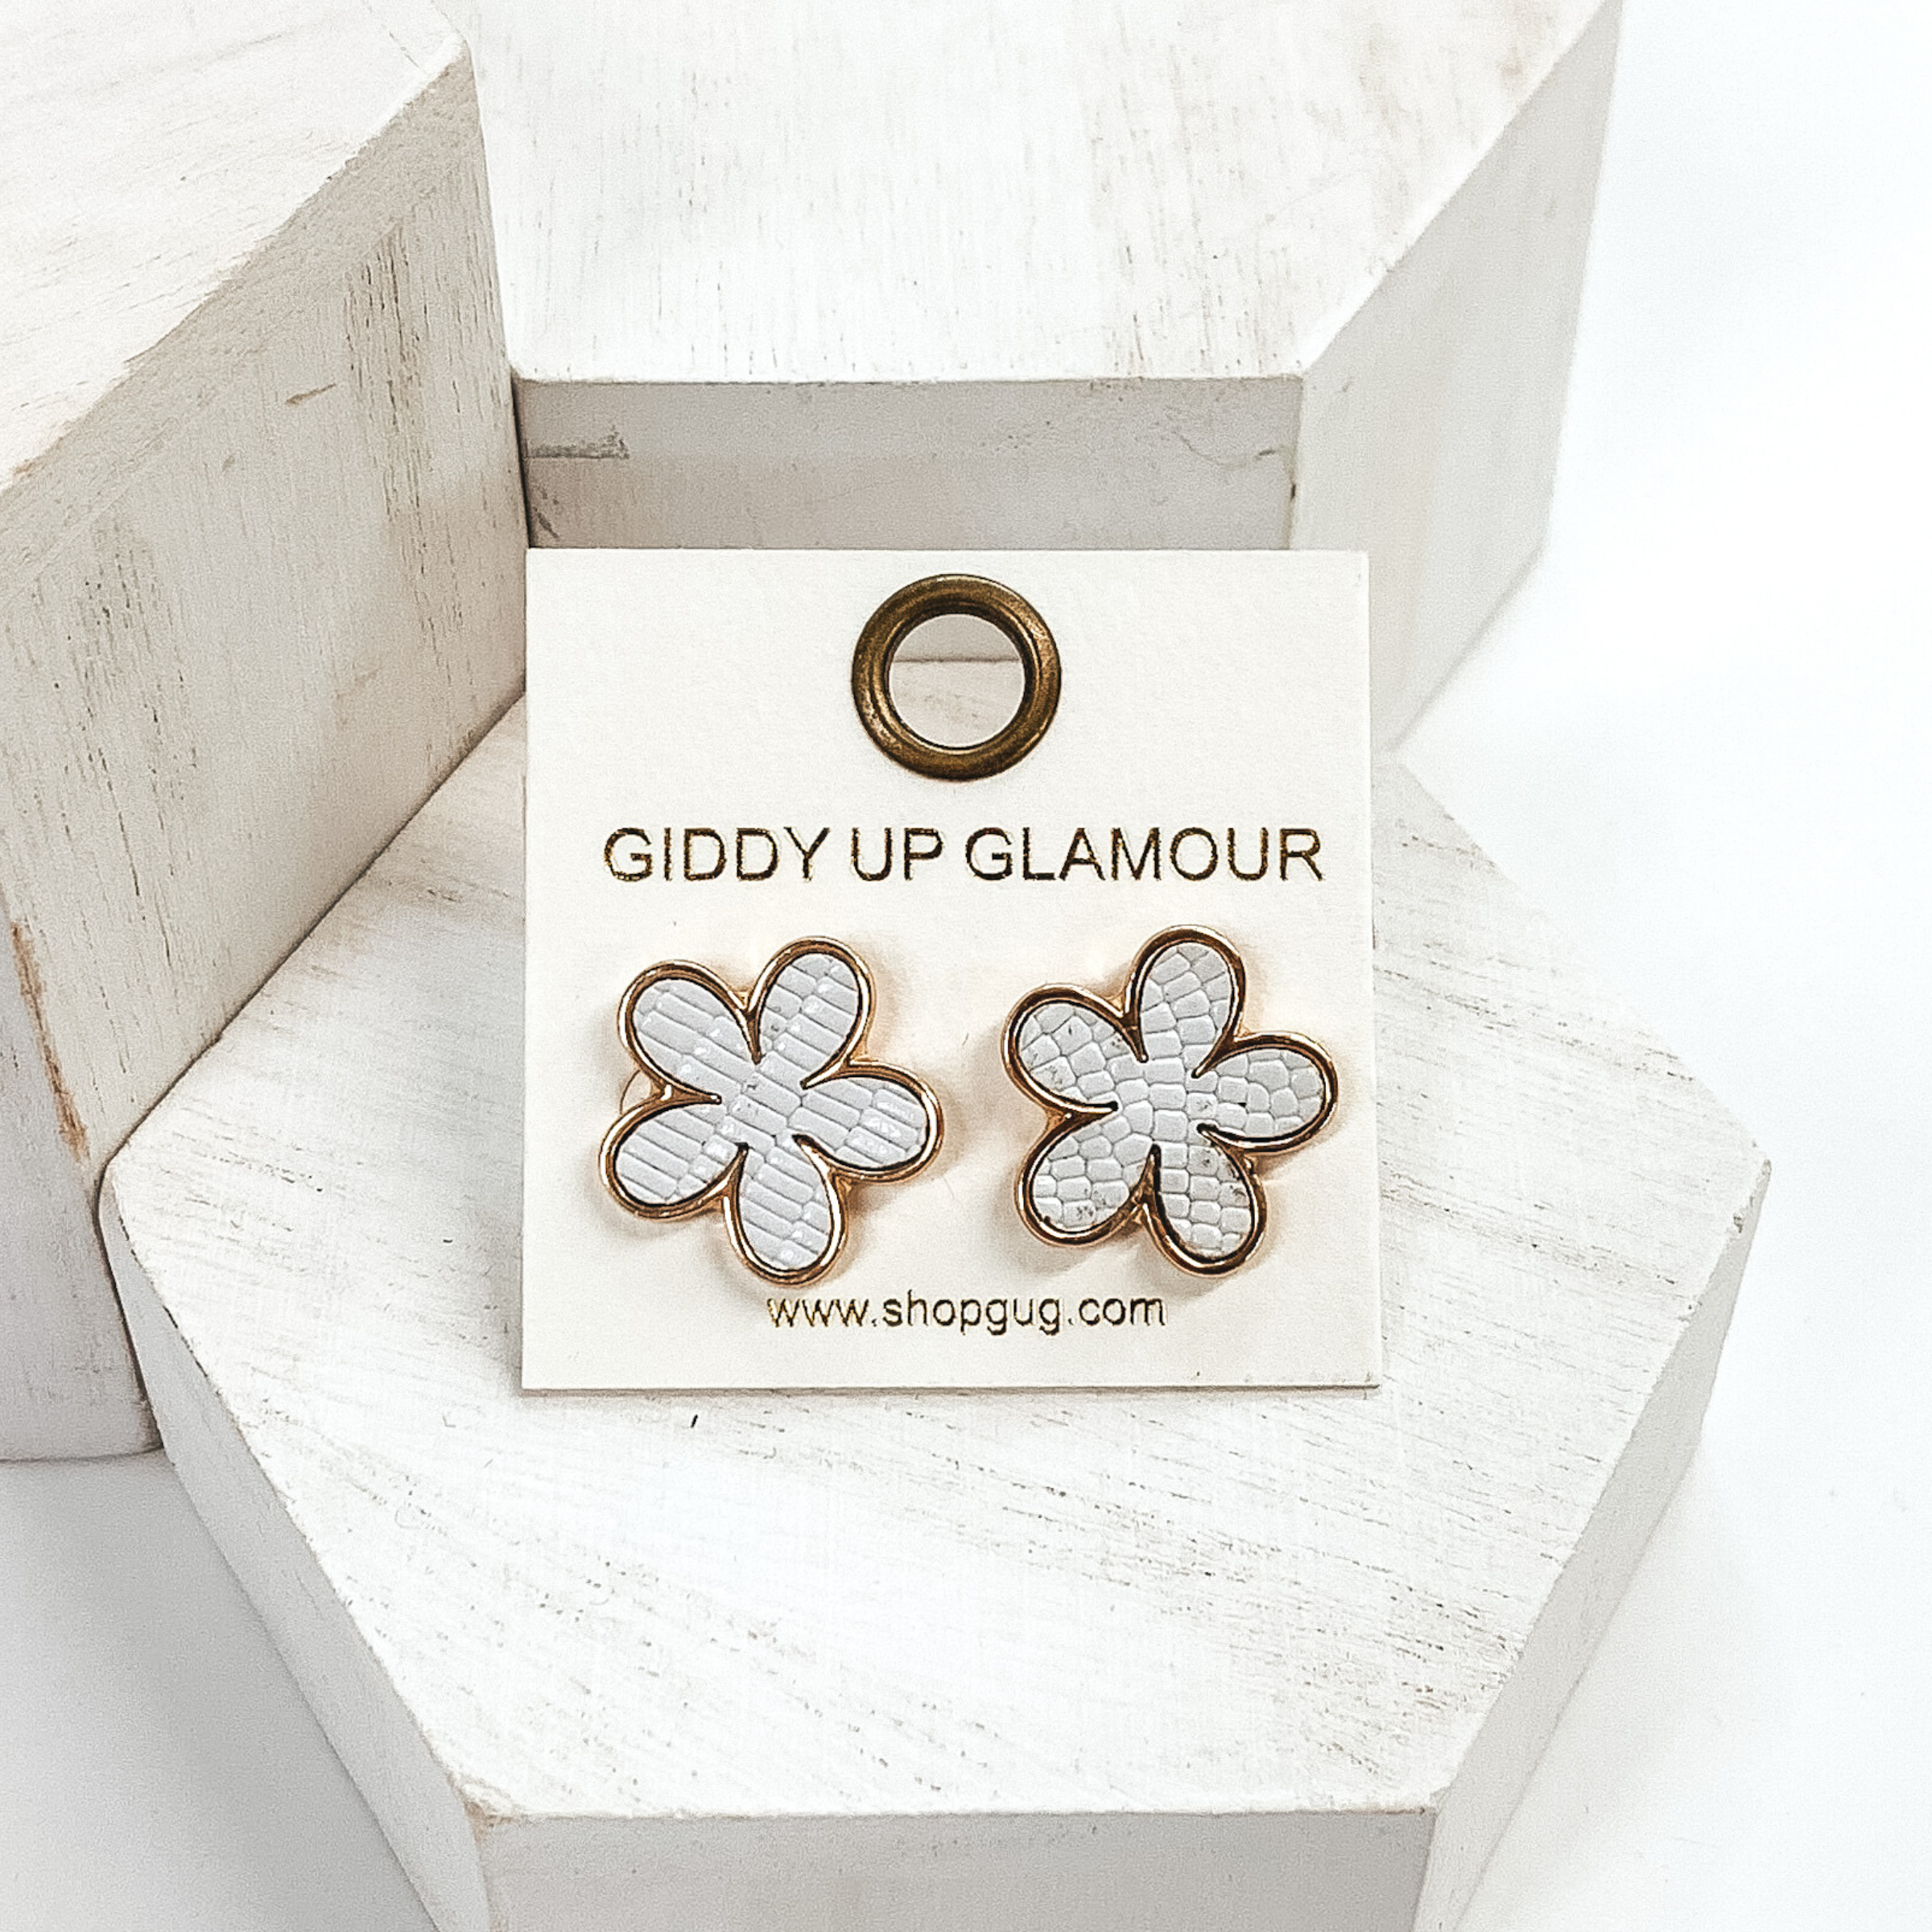 These are gold flower stud earrings with a white textured inlay. These earrings are pictured on white blocks on a white background. 